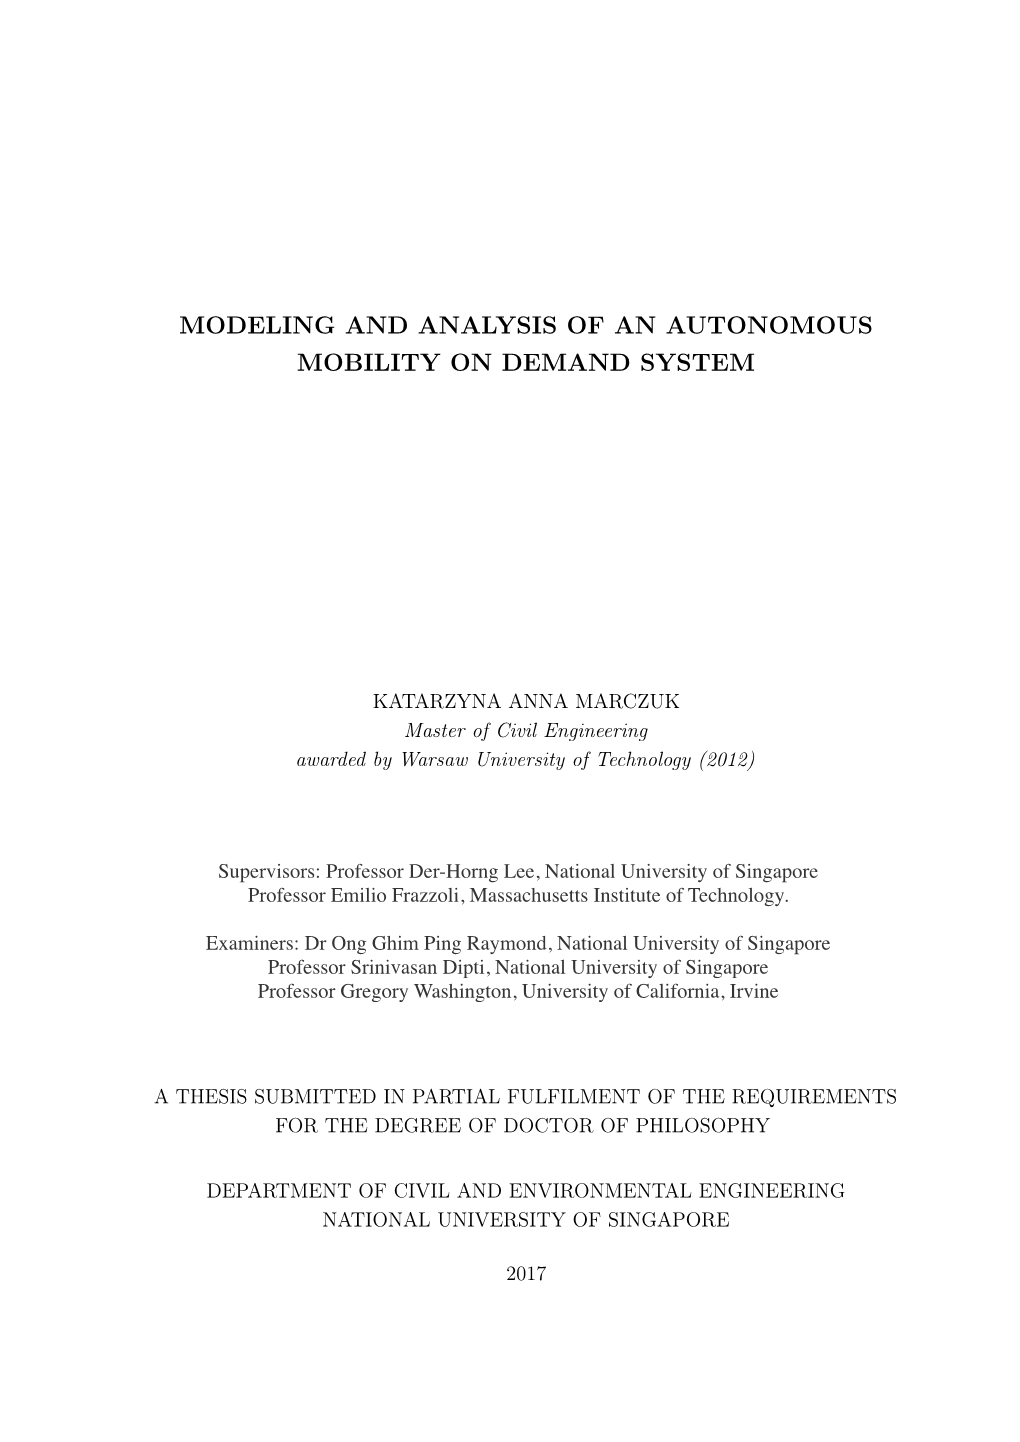 Modeling and Analysis of an Autonomous Mobility on Demand System